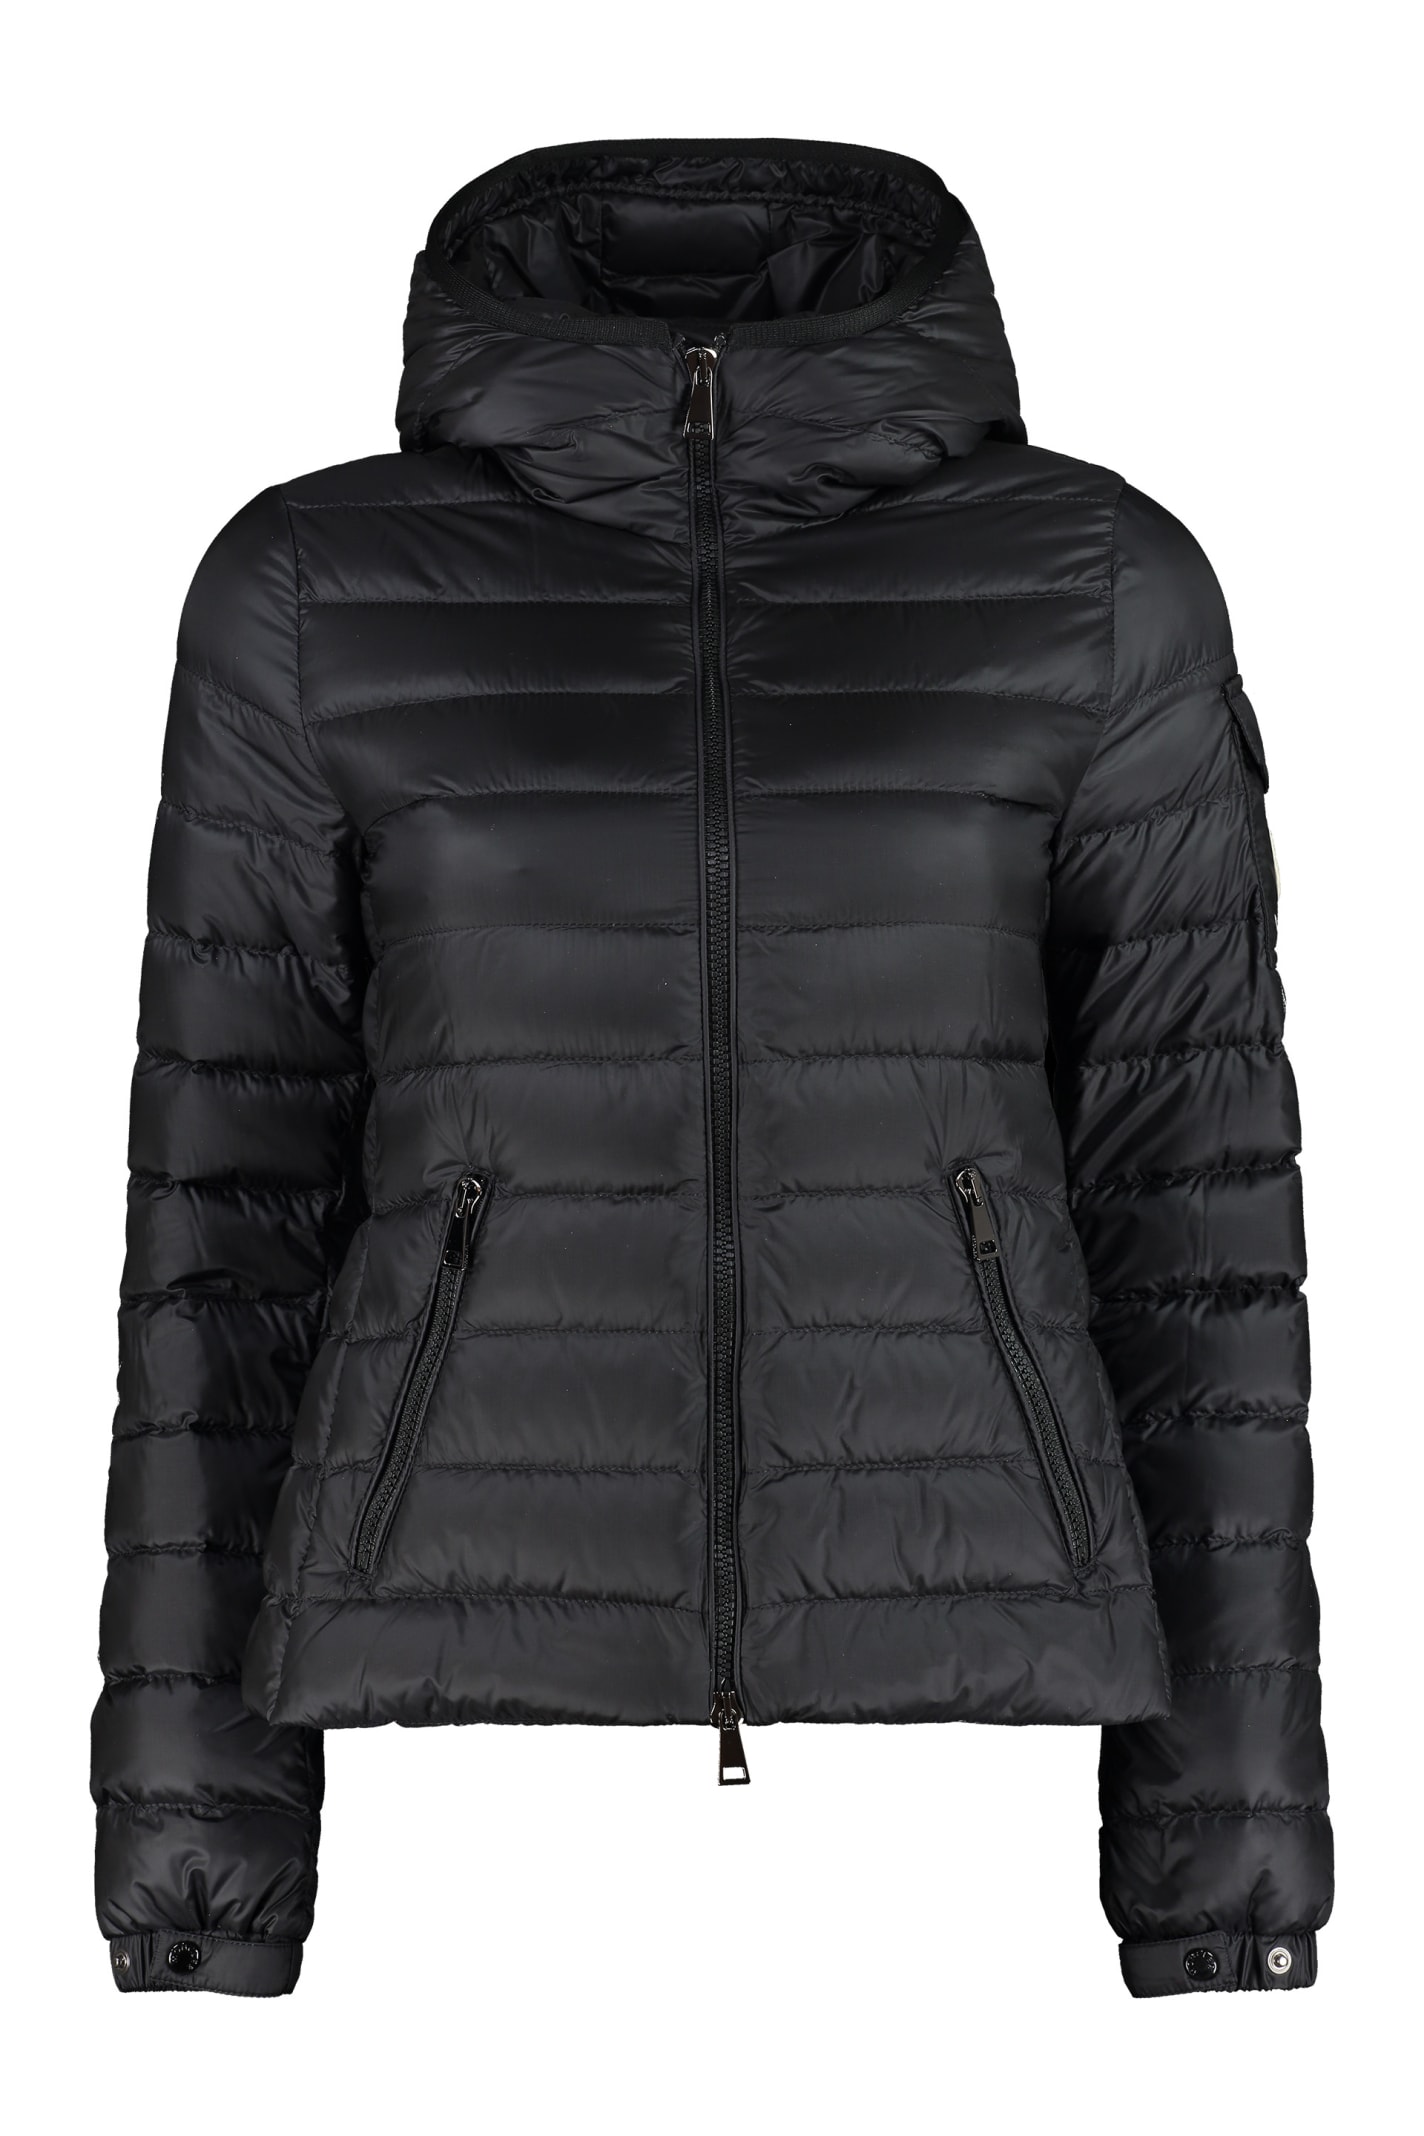 MONCLER BLES HOODED DOWN JACKET,1A128005396Q 999